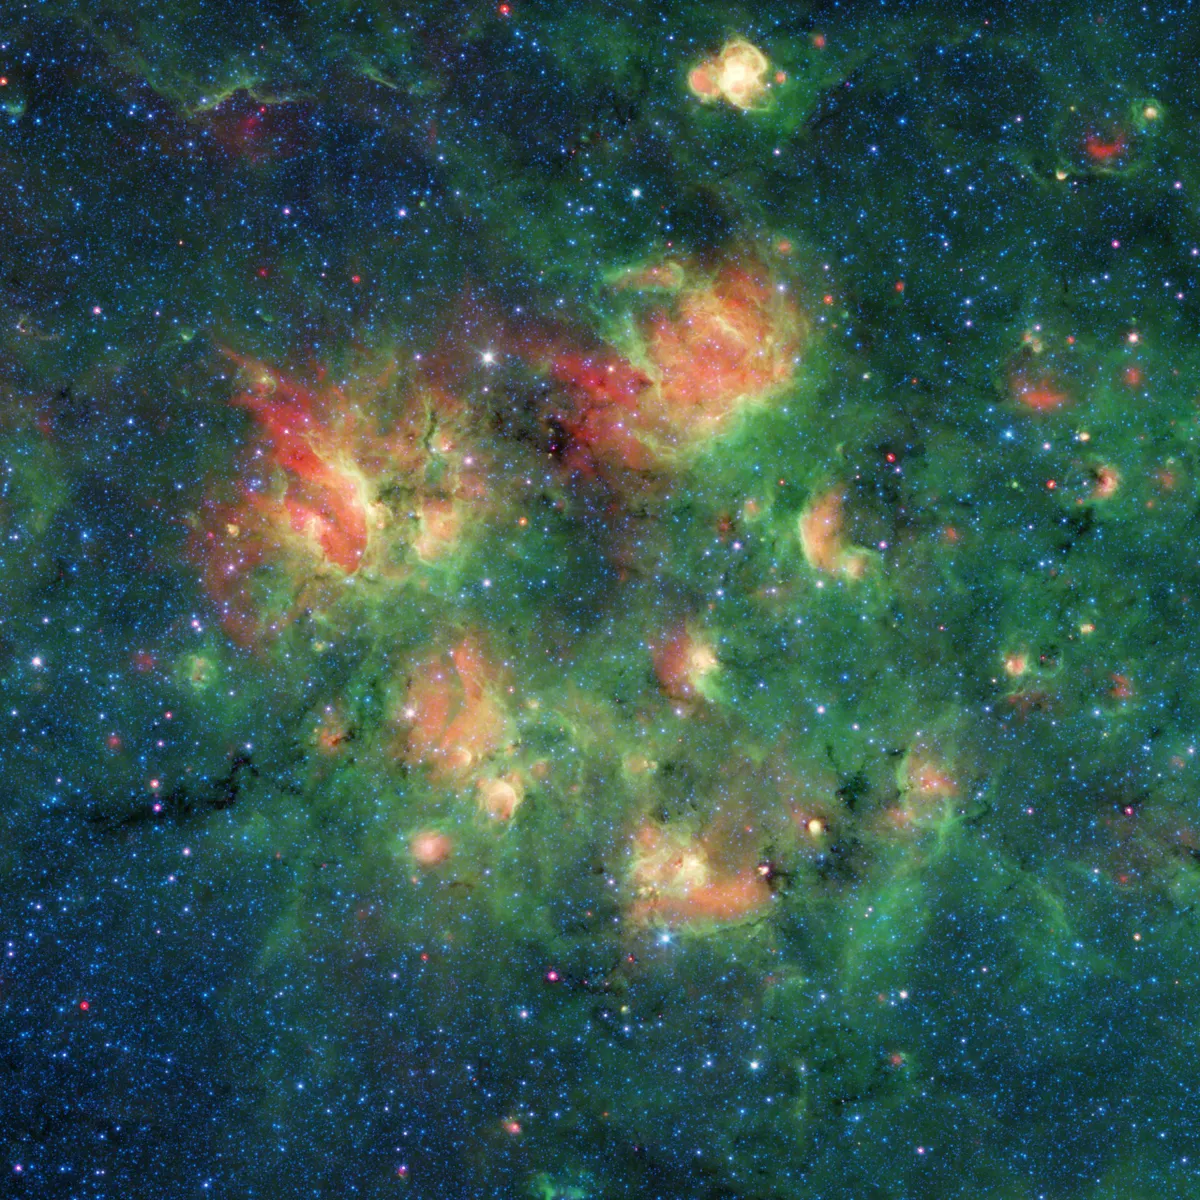 Cosmic bubbles seen by the Spitzer Space Telescope NASA/JPL-Caltech/Milky Way Project